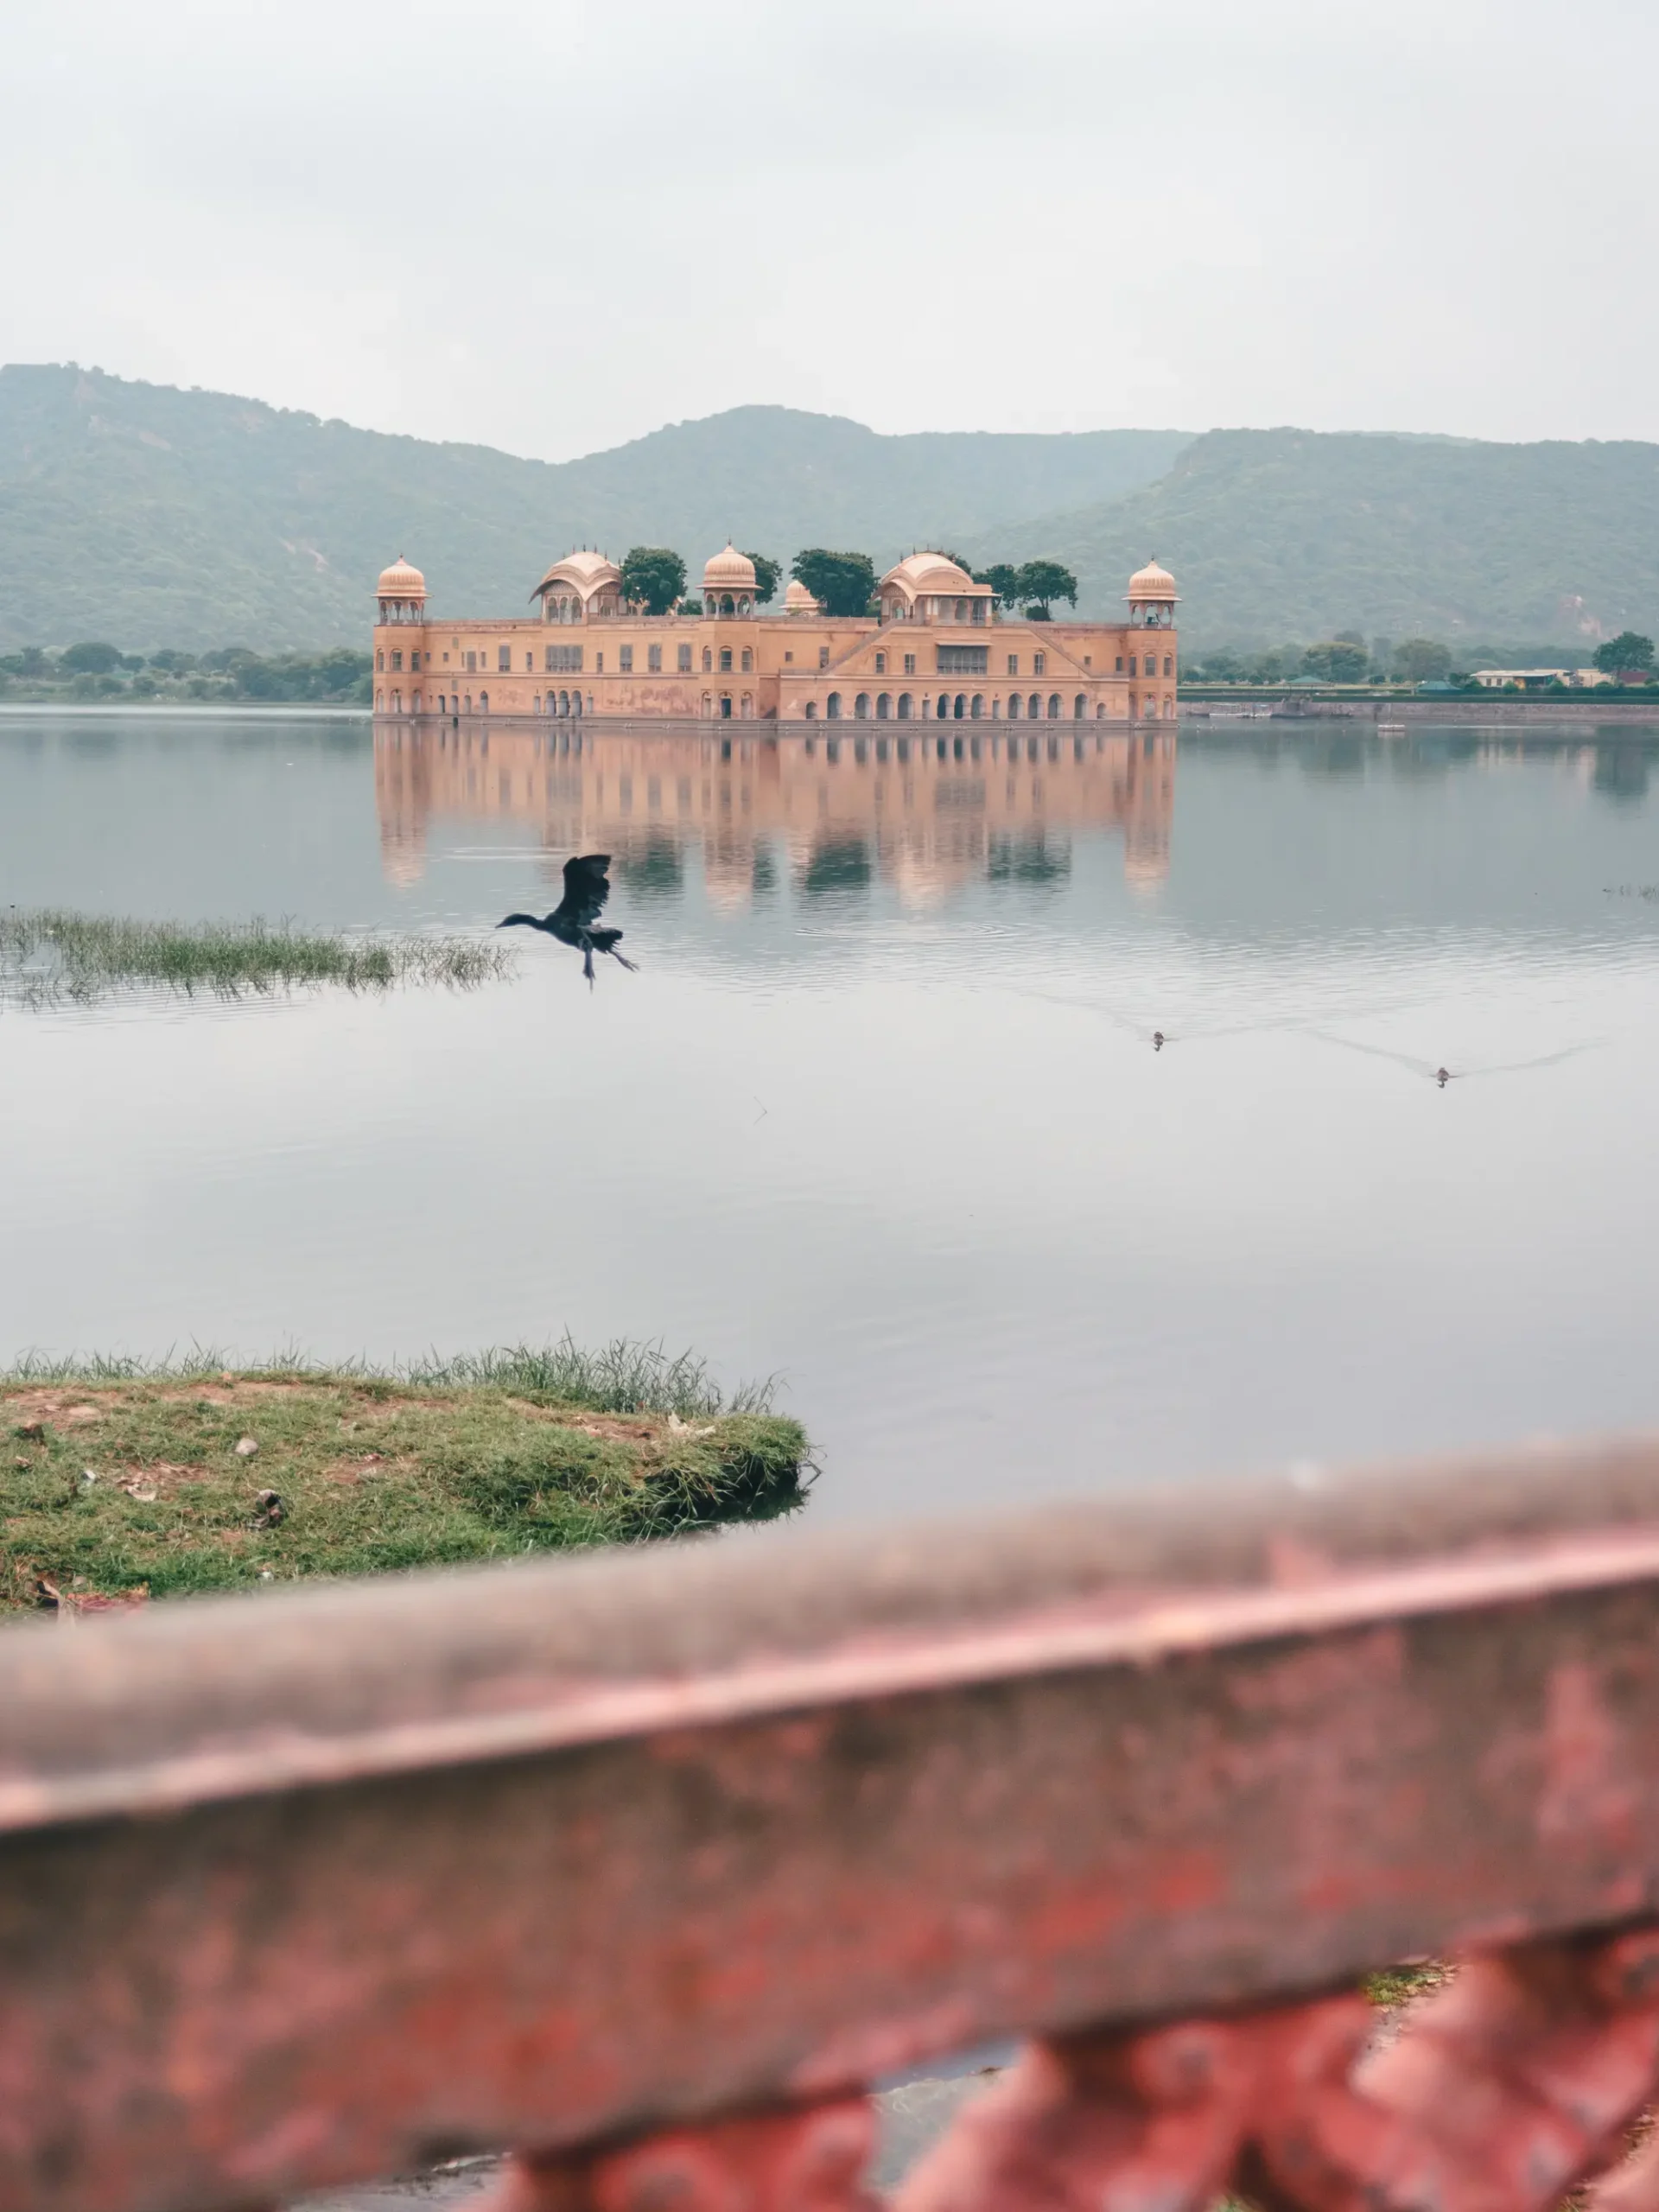 Looking out at the light brown semi-submurged Jal Mahal Water Palace in the middle of a lake with a bird flying by, during 2 days in Jaipur.